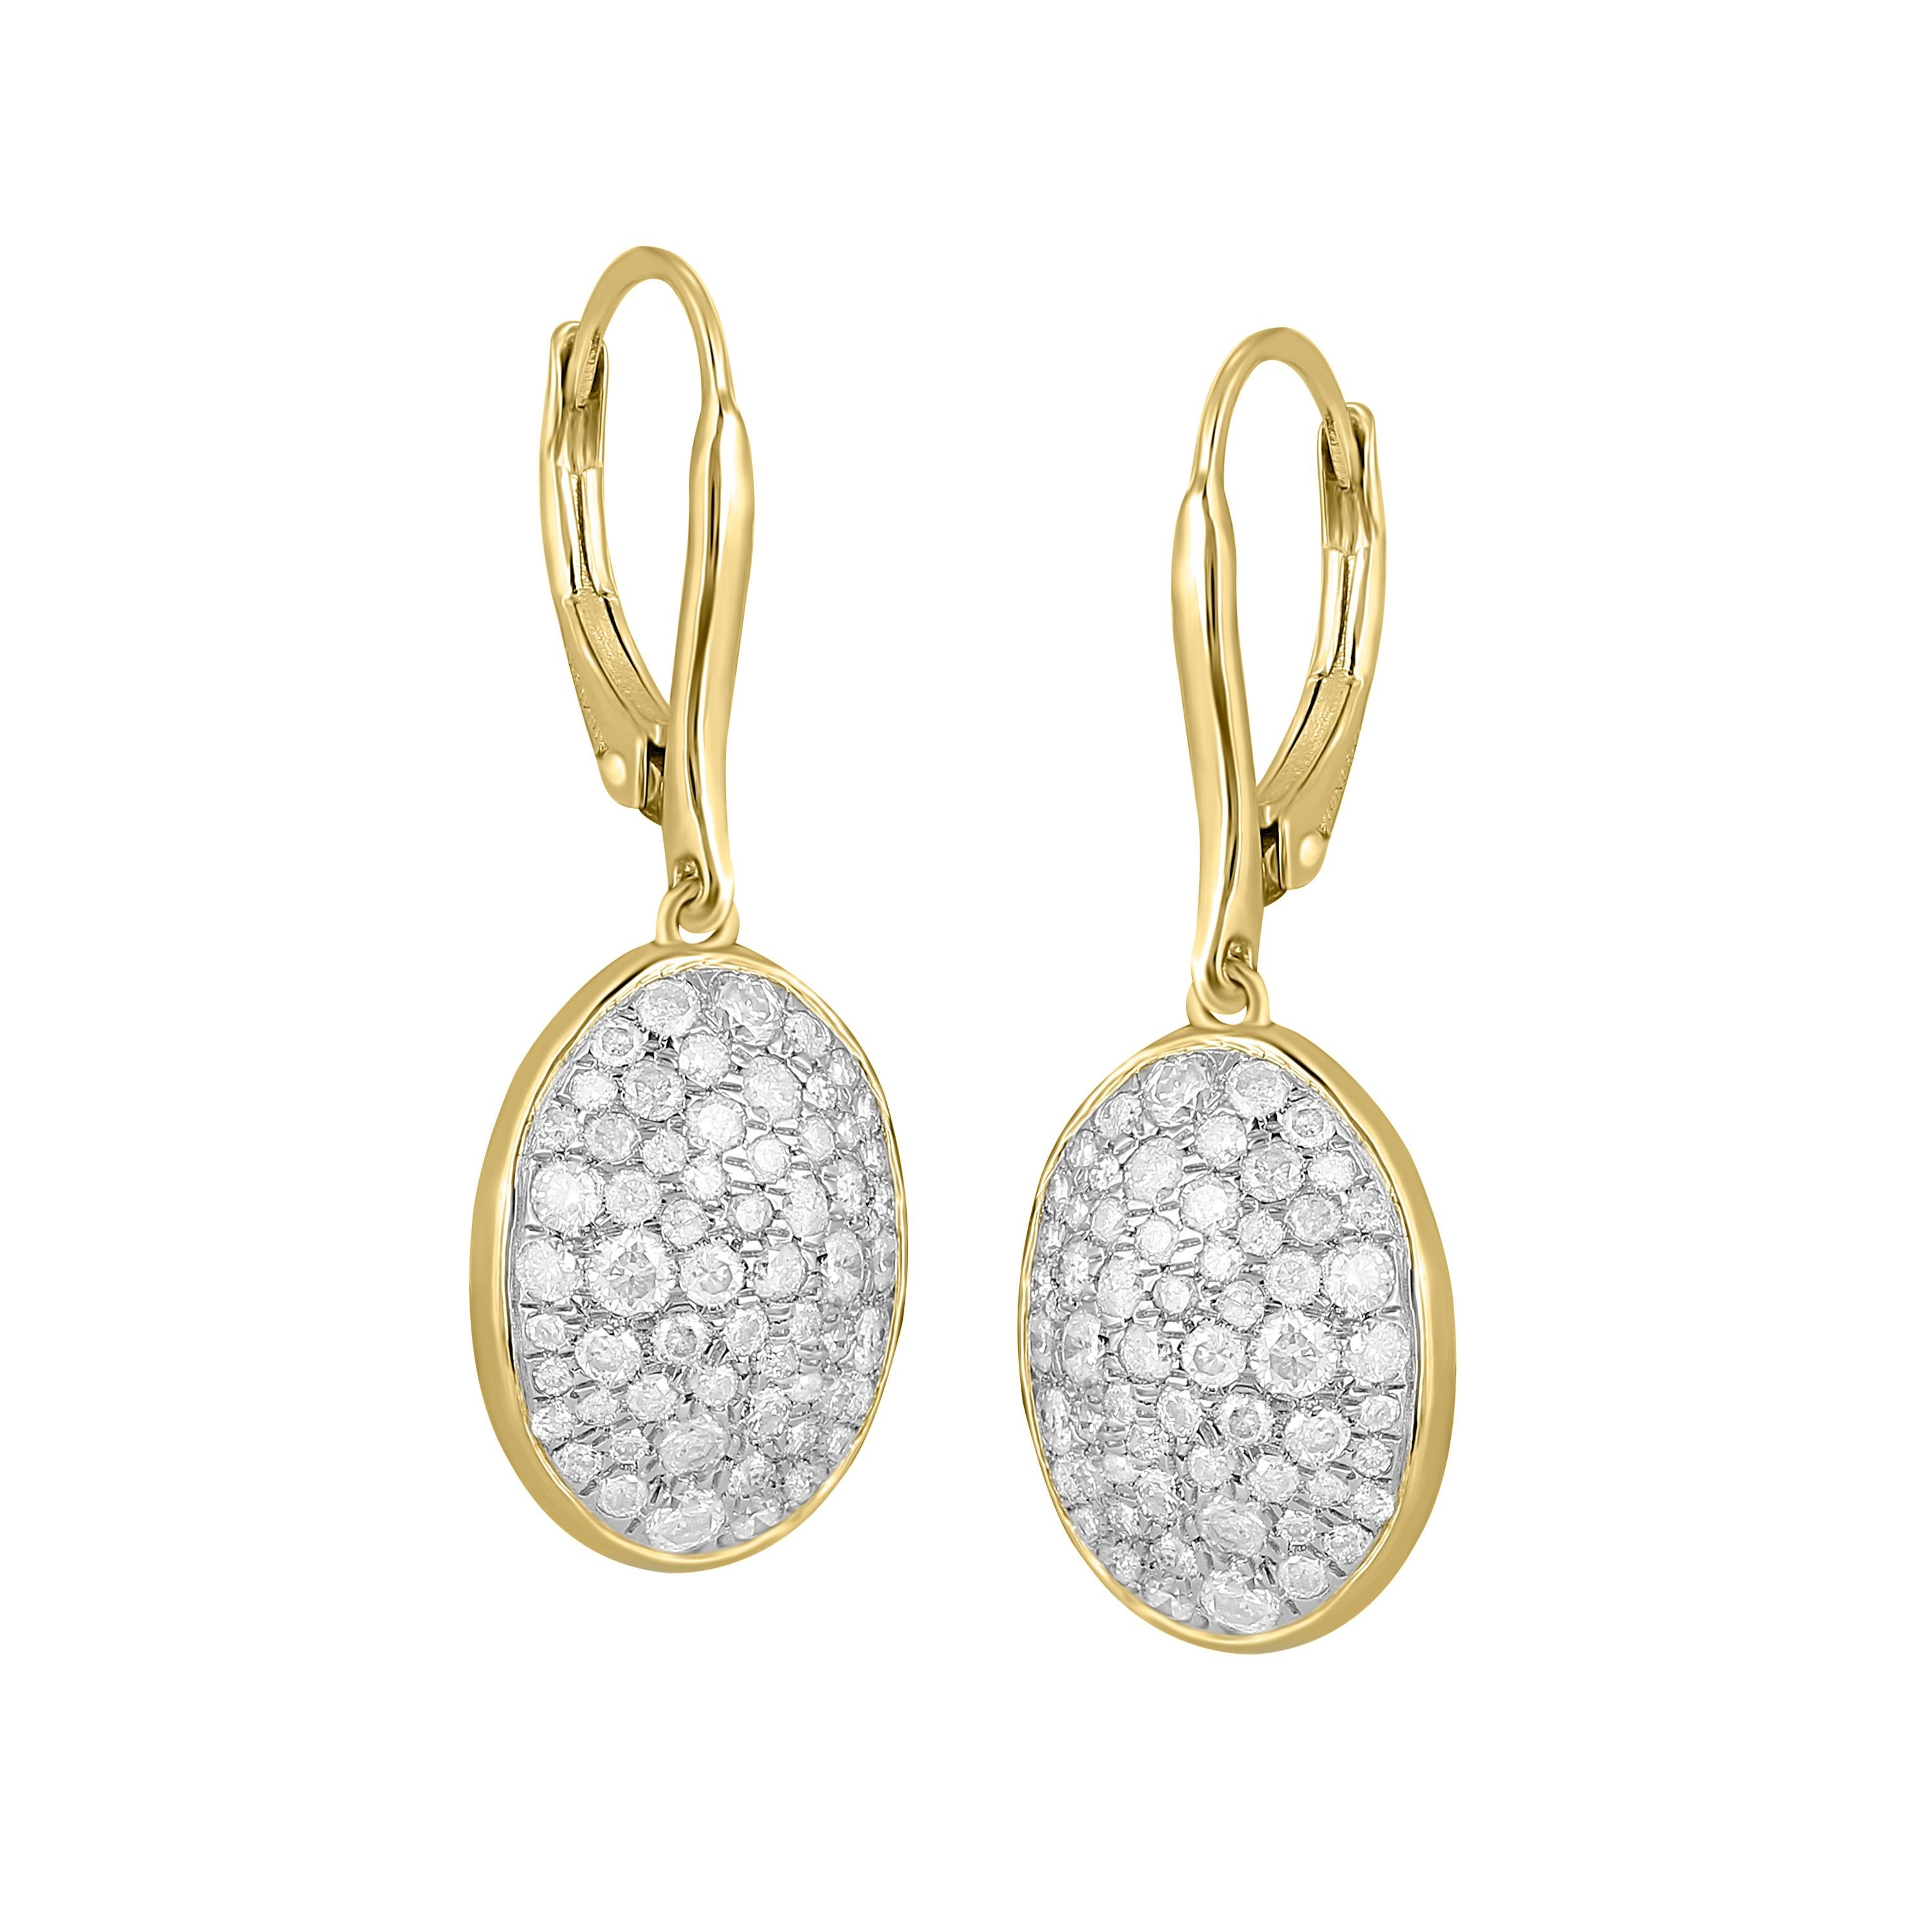 Blinded by the light! These stunning ovals drop earrings by Gemistry are packed with sparkle and shine, as 1.36 ct. t.w. round brilliant cut diamonds create as shimmery mosaic in white rhodium. Finally crafted in 925 sterling silver. Perfect for